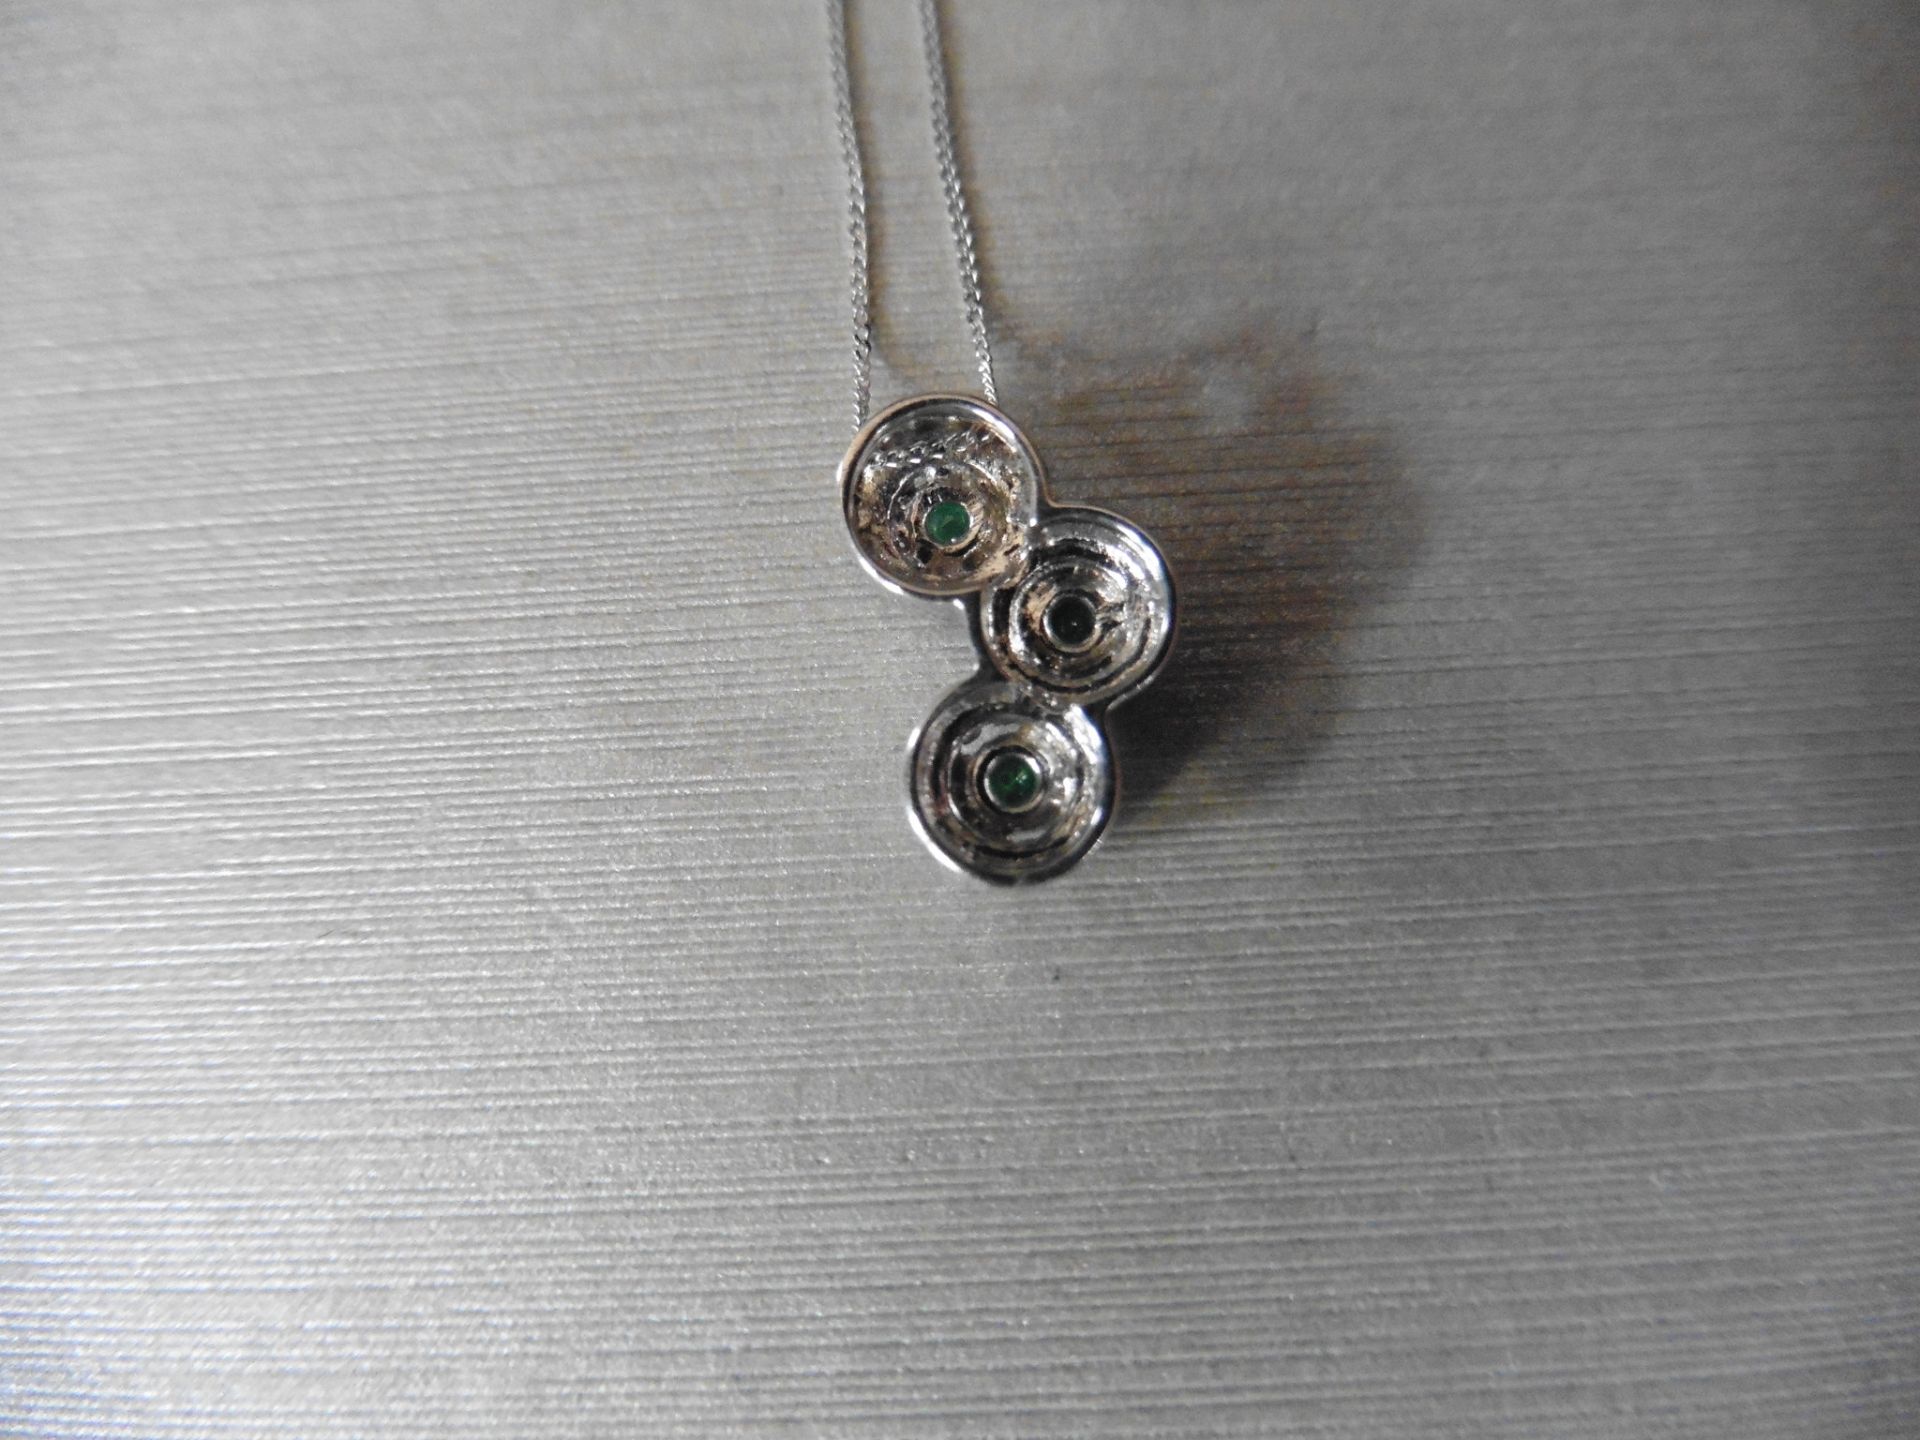 0.35ct diamond set halo trilogy style pendant. 3 centred emeralds 0.17ct total with halo setting 0. - Image 2 of 3